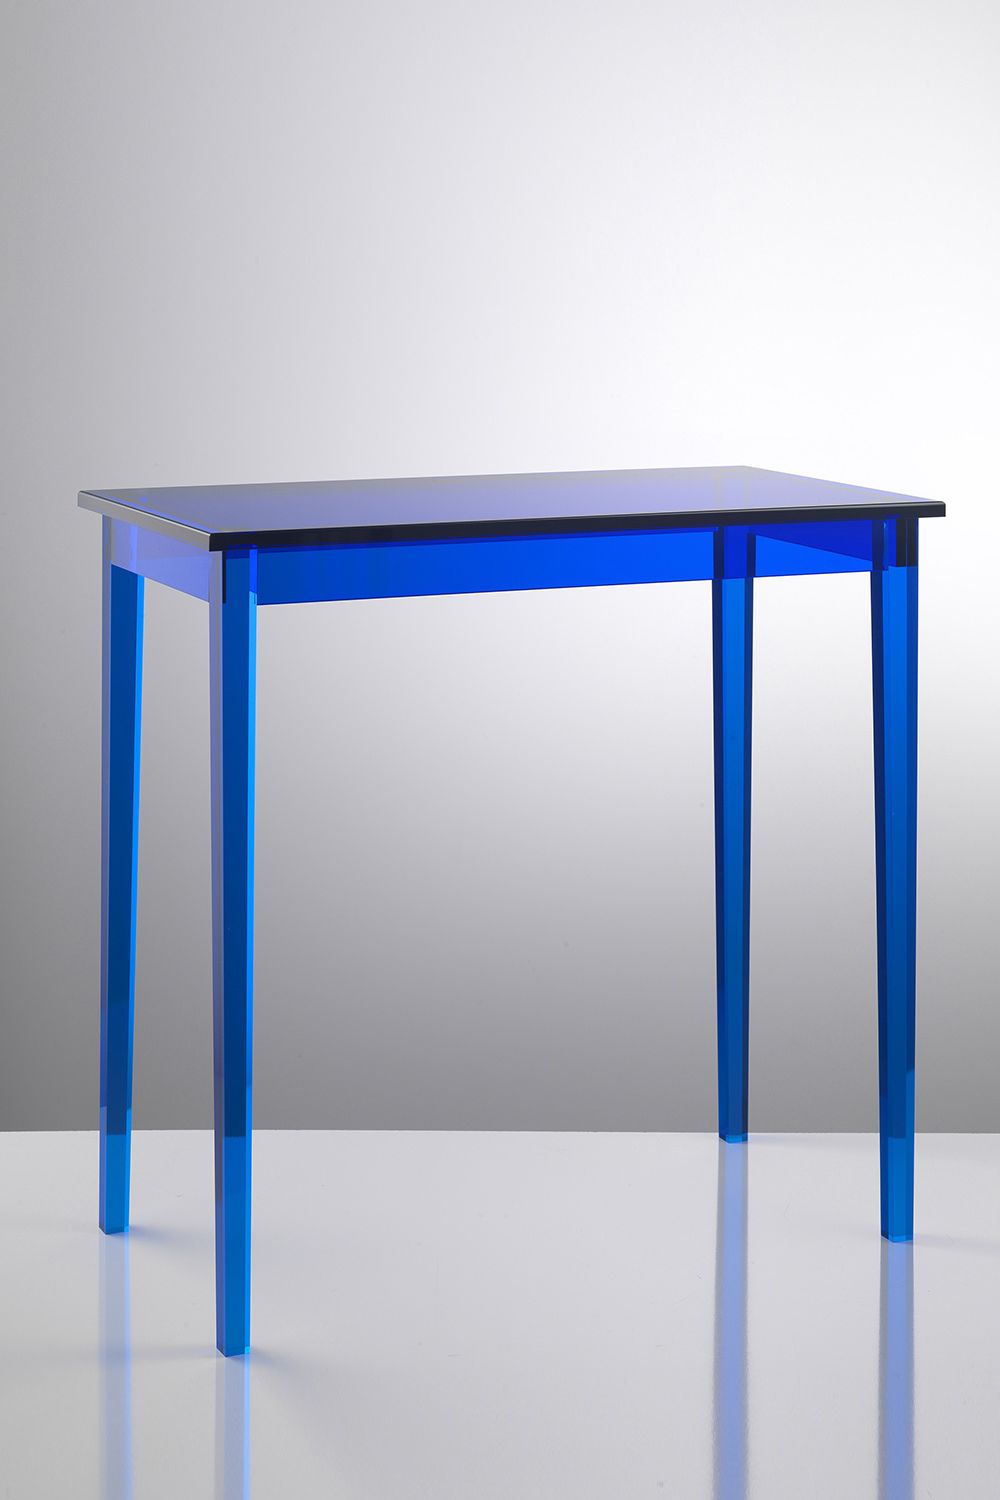 Guelfo table